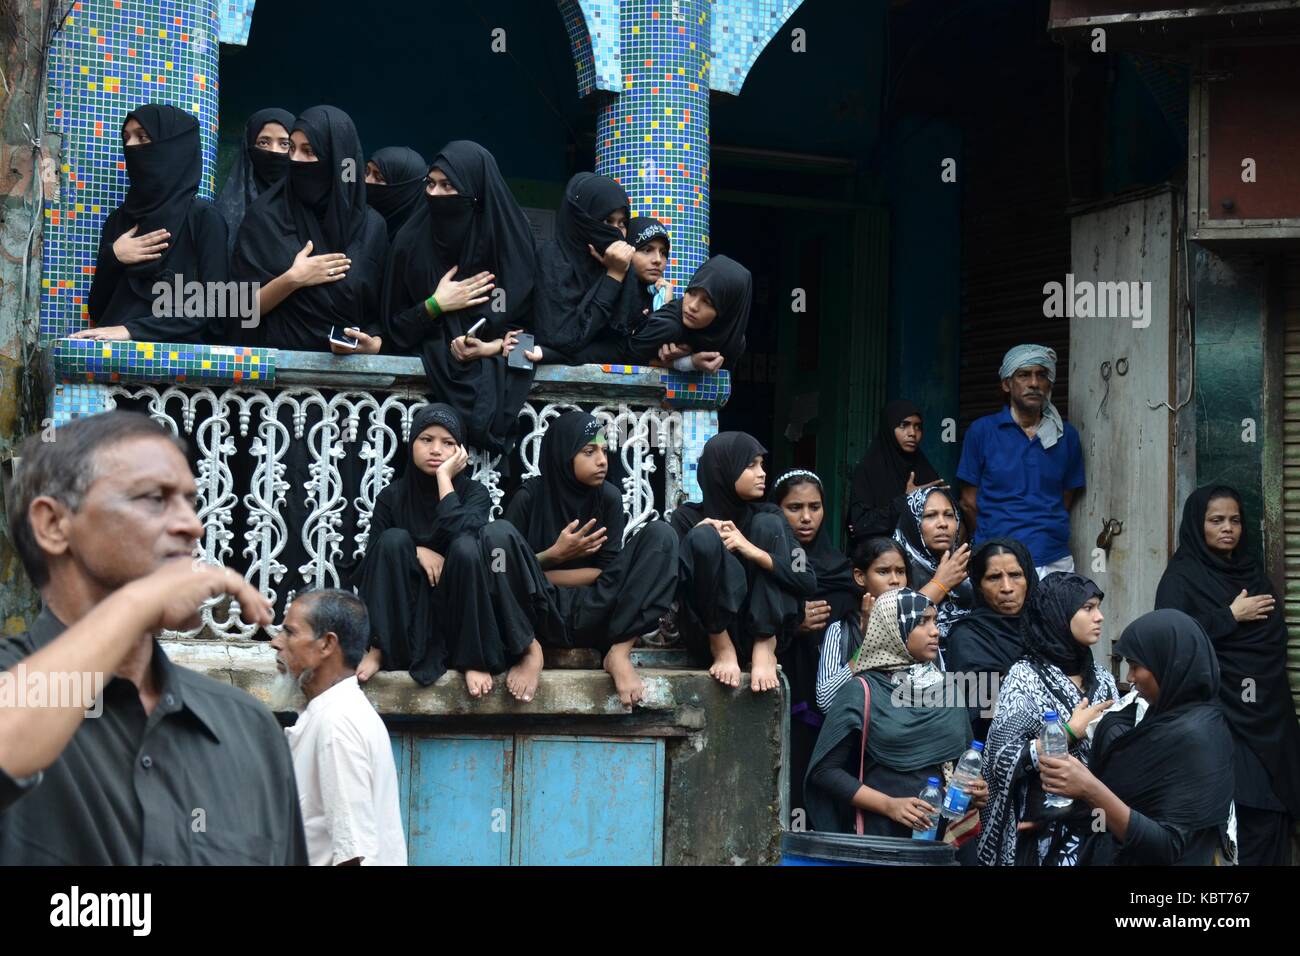 Kolkata,India 30th September,17.Shia muslim girls gathered during Muharram in respect of Hussain Ali who was martyred in the Battle of Karbala. Credit : Dipayan Bose/Alamy live news Stock Photo